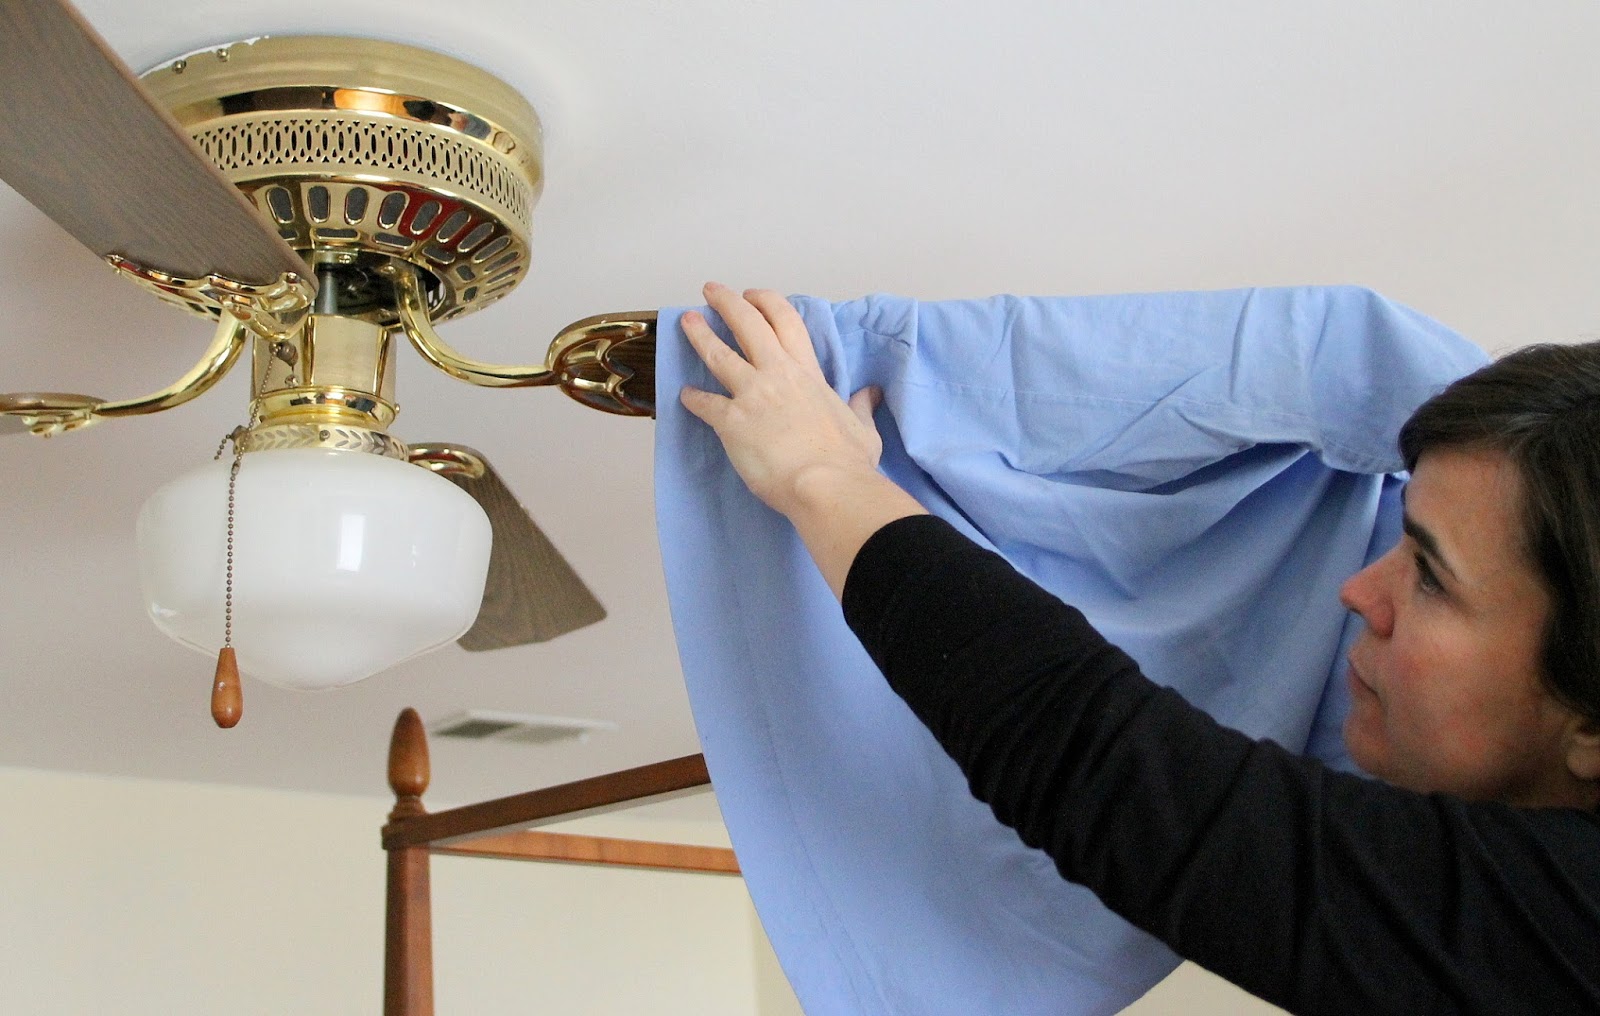 How to clean ceiling fans with pillow cases